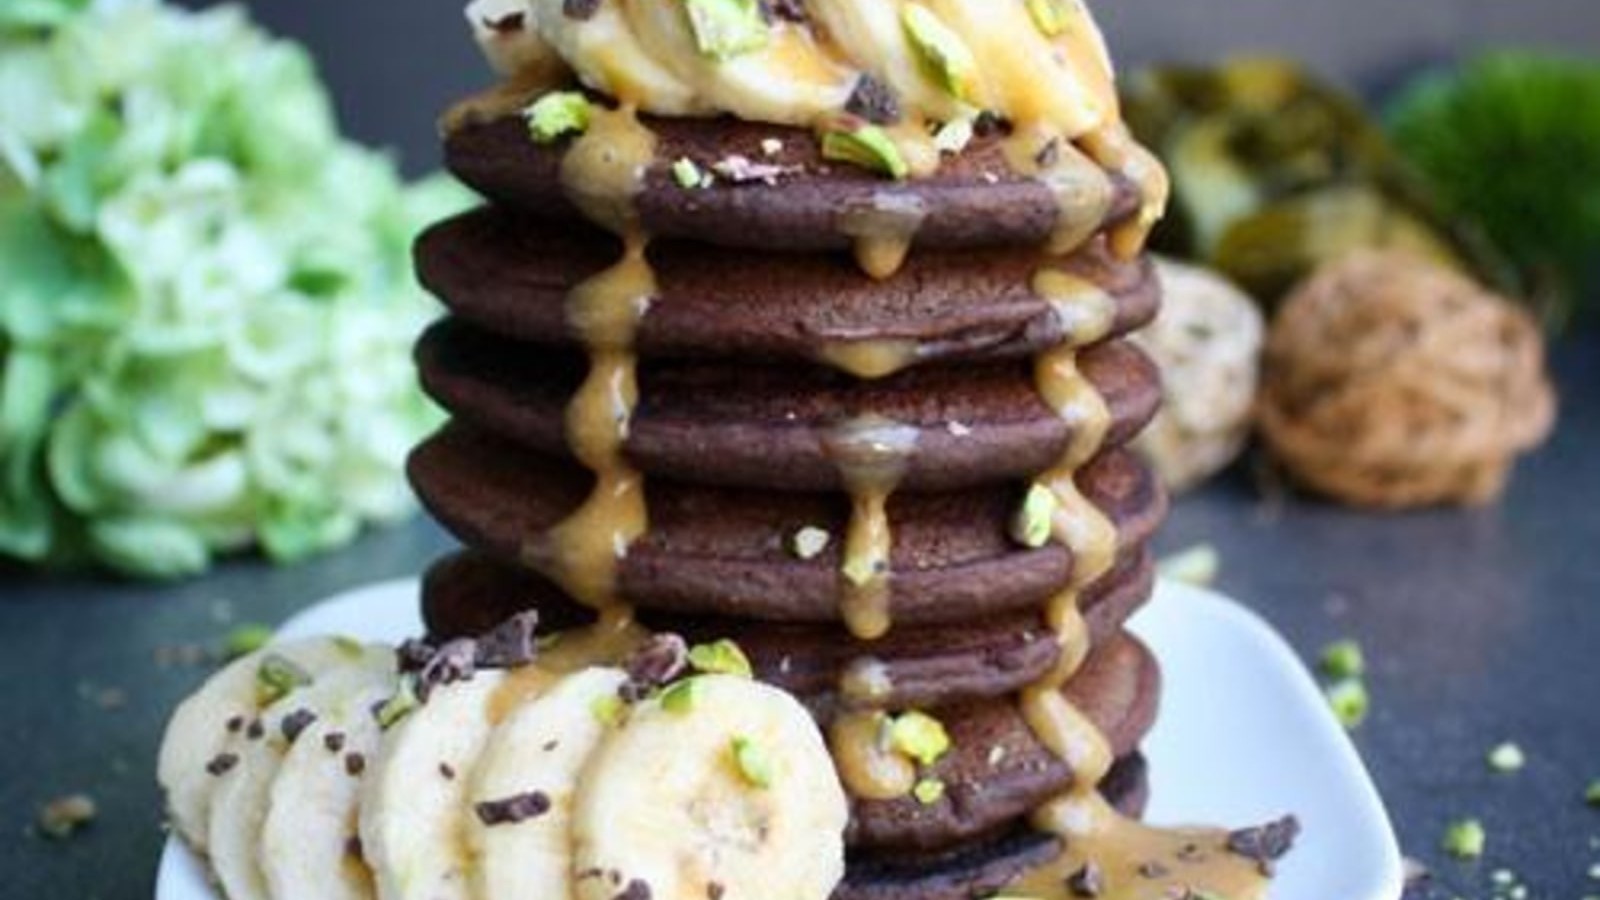 Image of Cacao Maca pancakes and salted toffee sauce